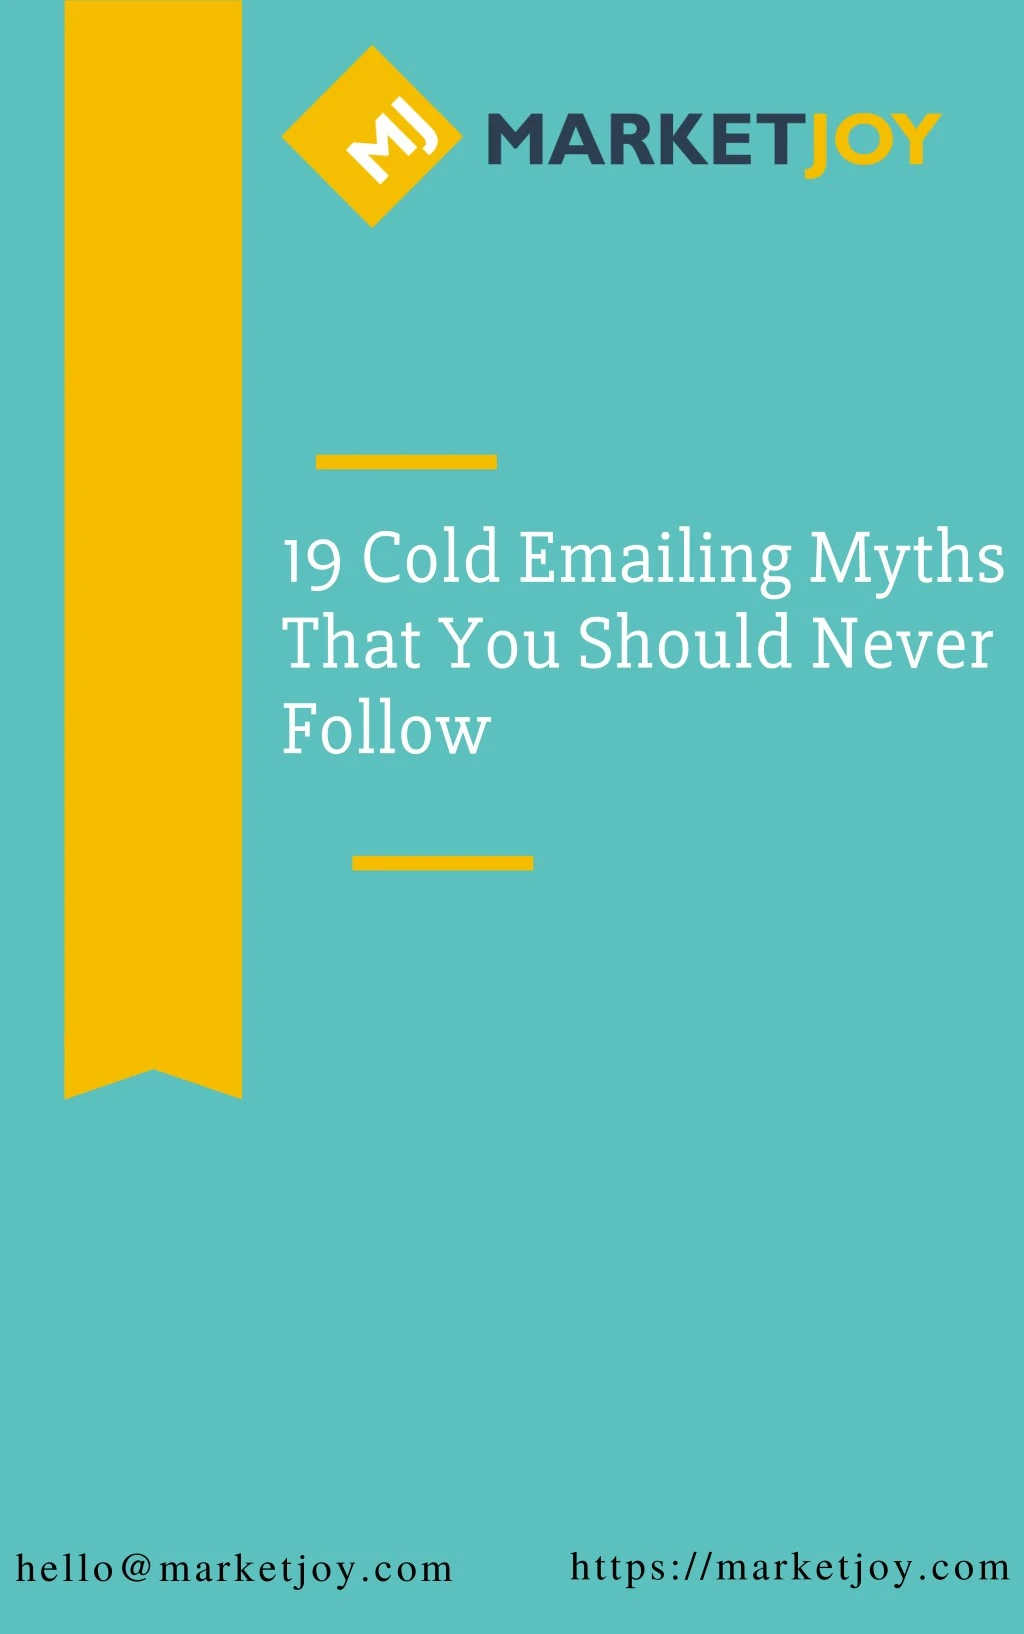 19 cold emailing myths that you should never